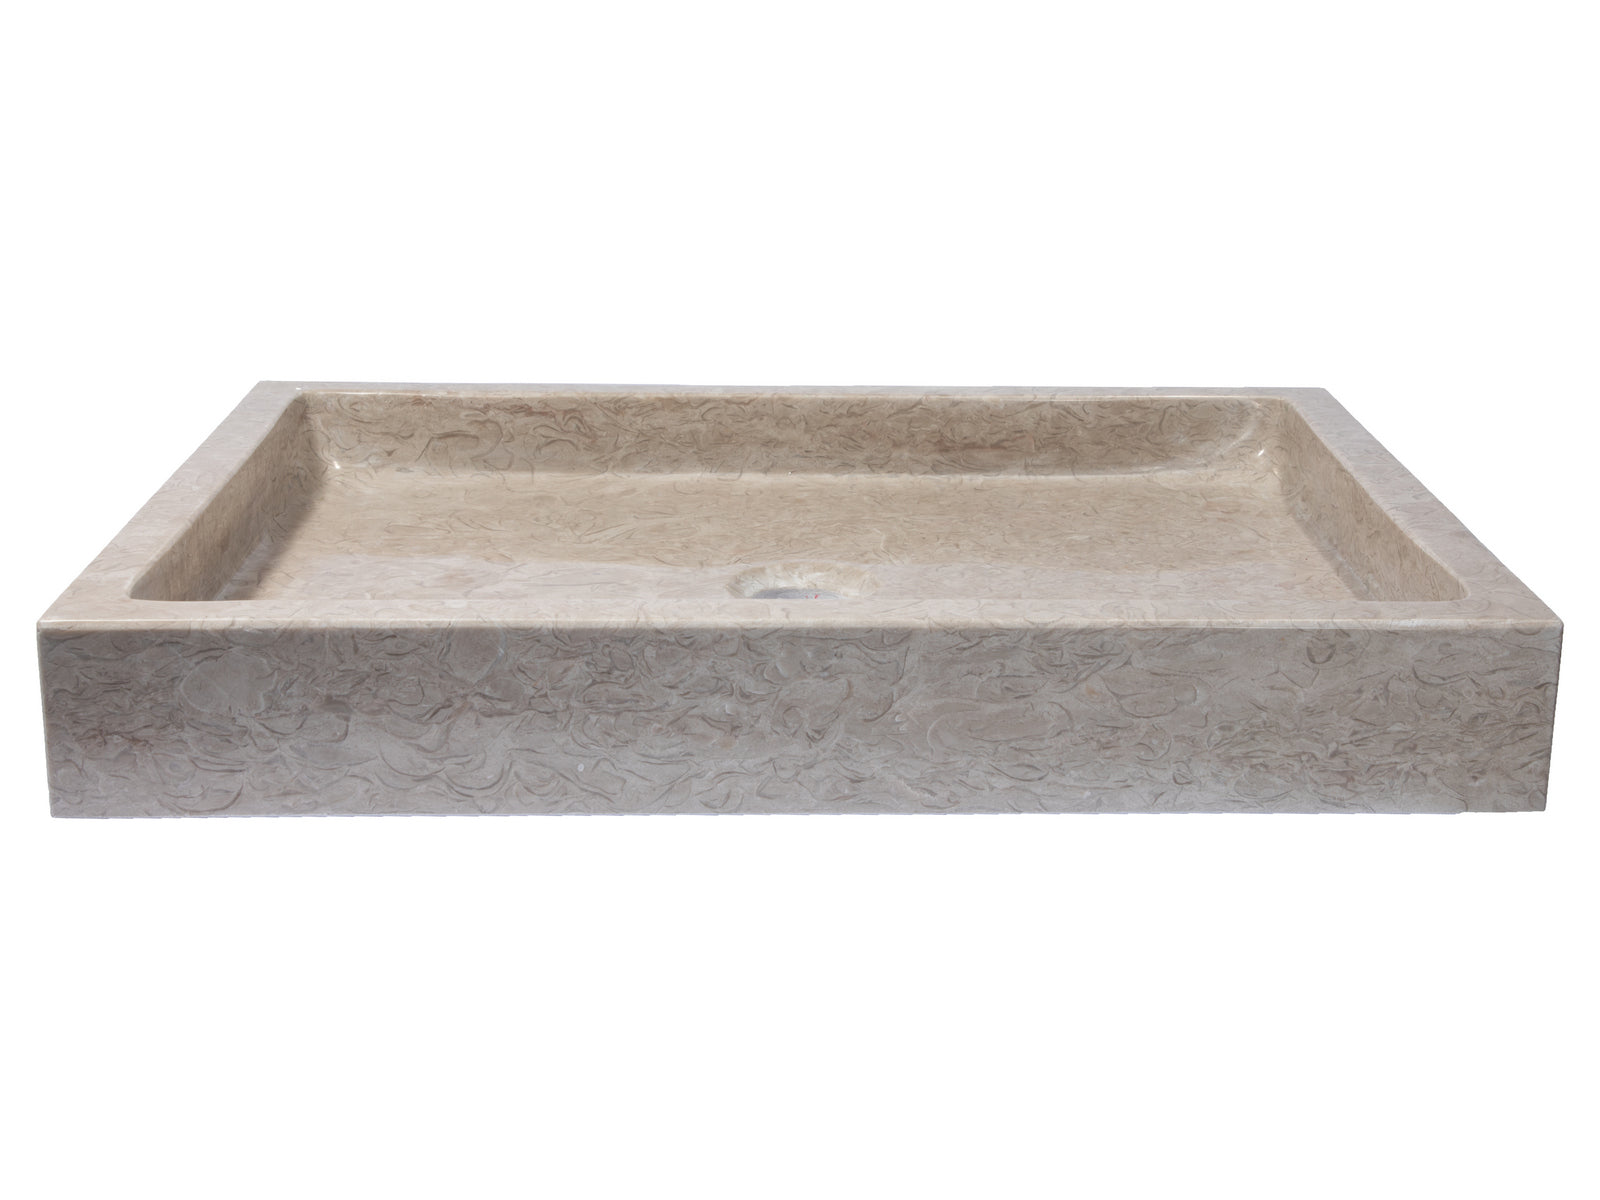 Rectangular Vessel Sink in Polished Penny Grey Marble